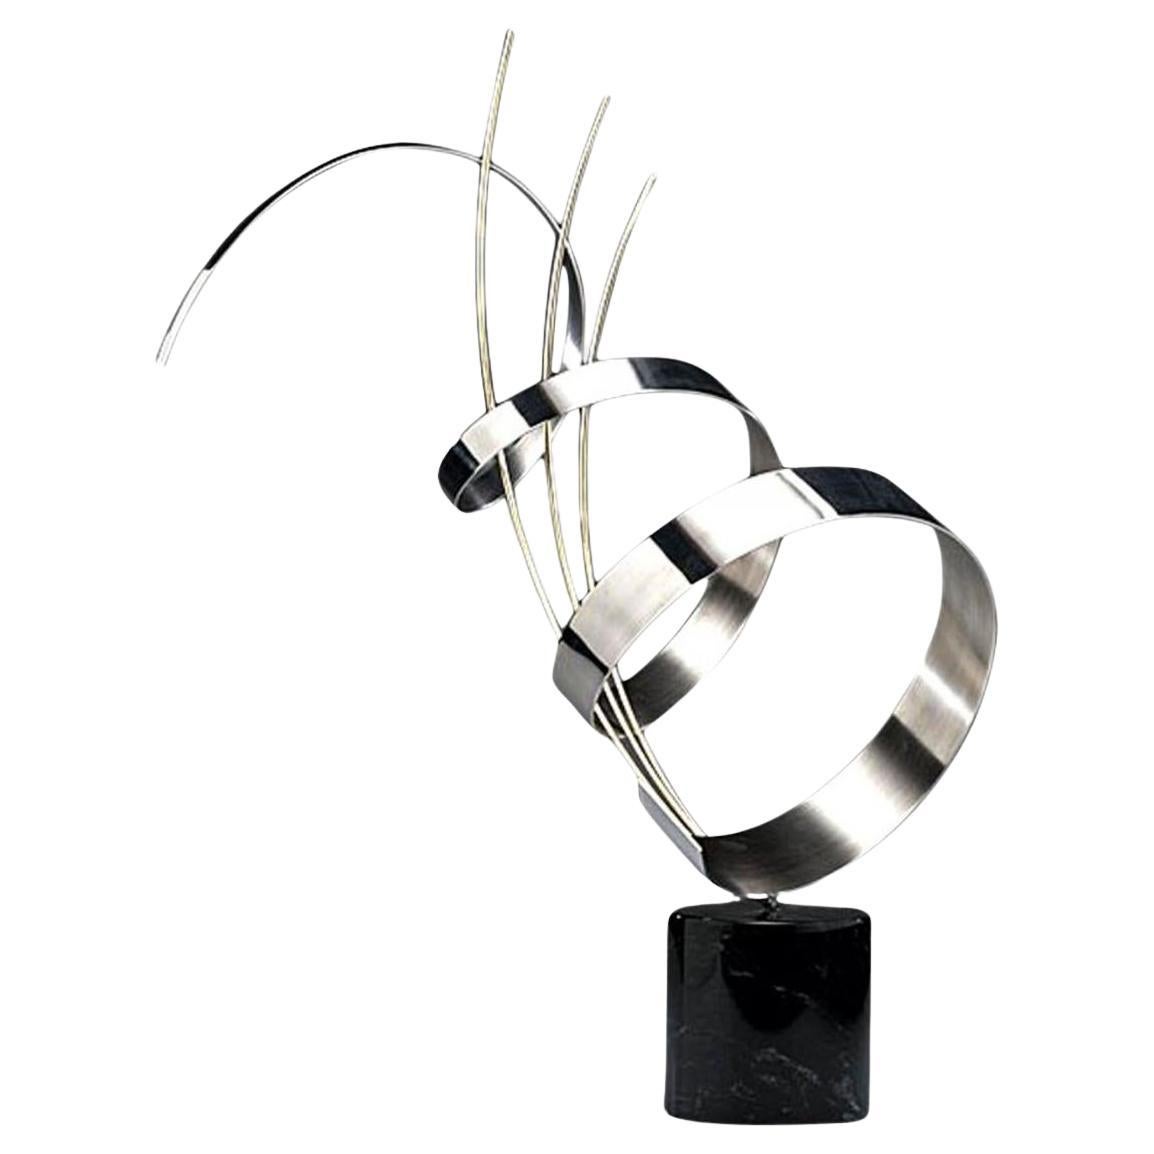 Kinetic Metal Sculpture on Marble Base by C. Jere